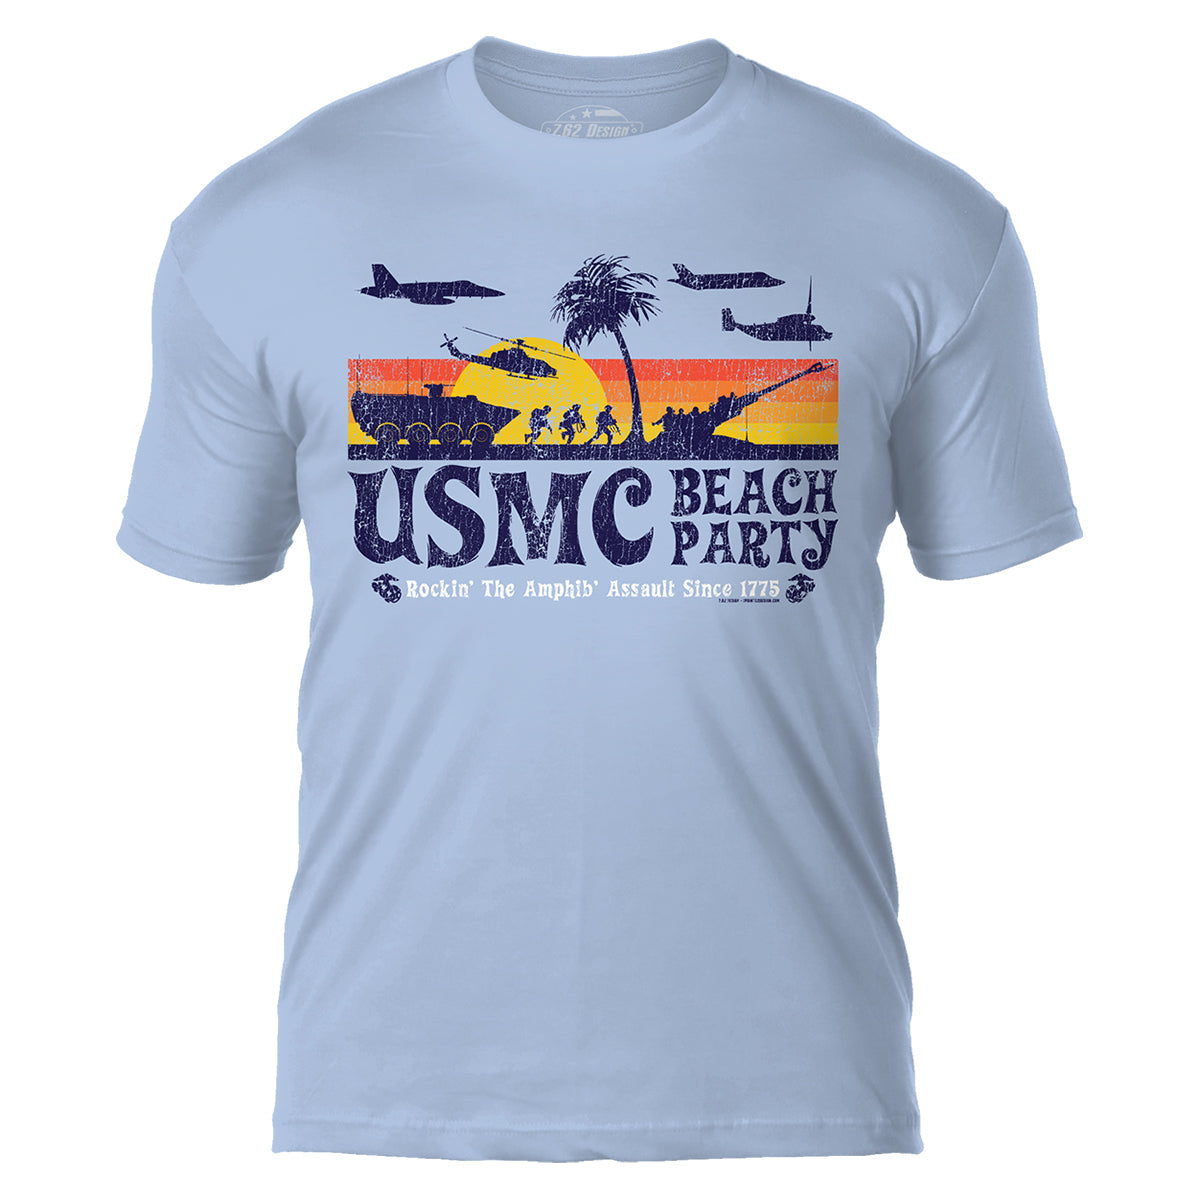 All USMC Products